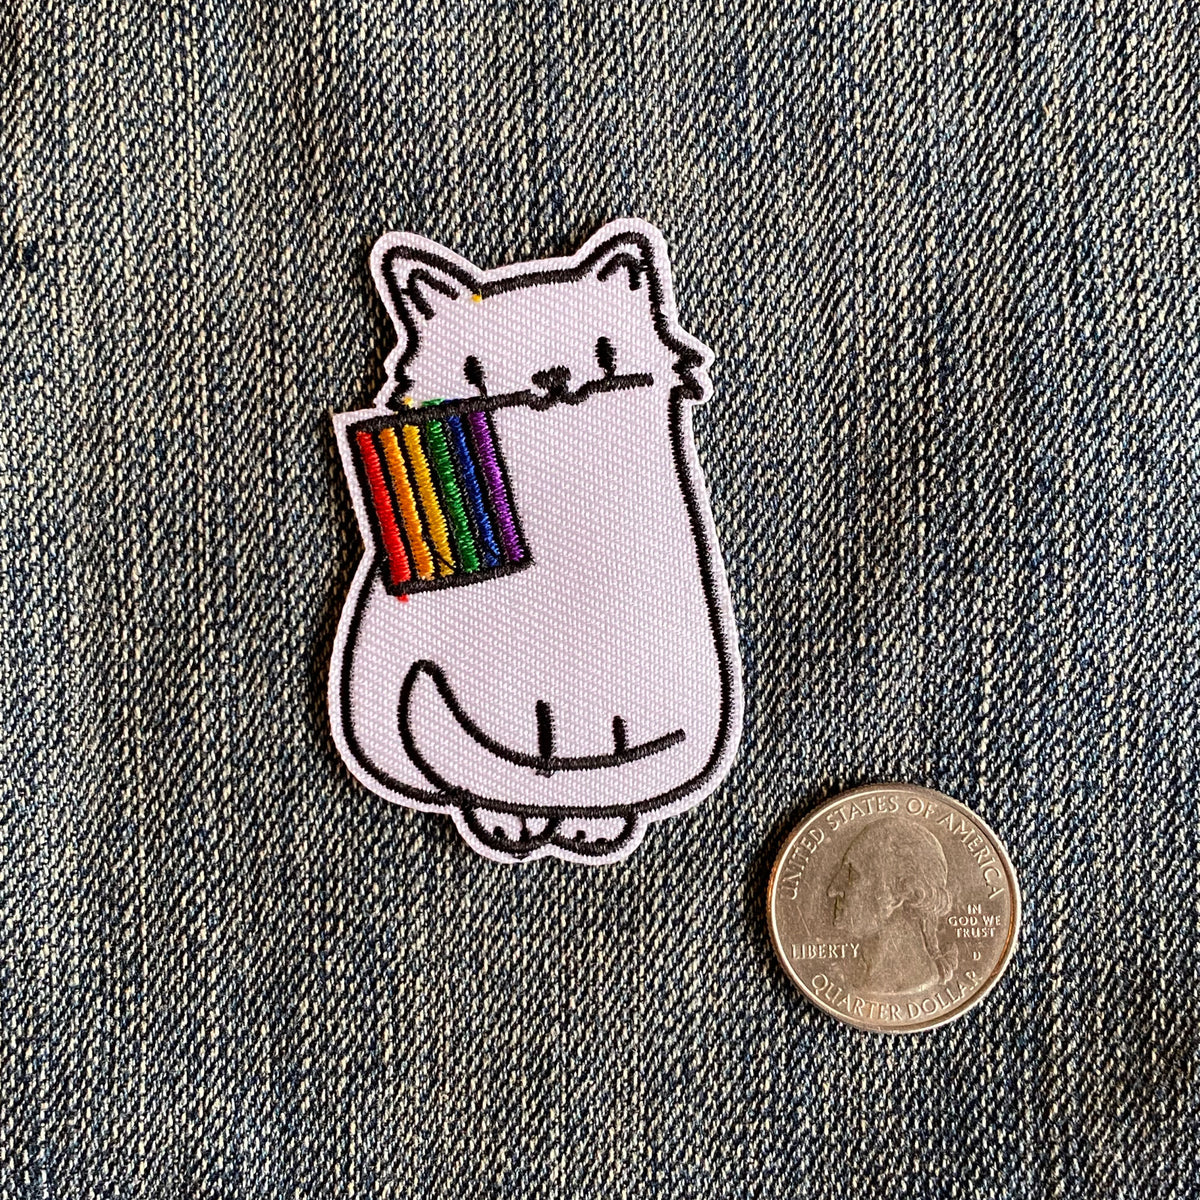 Kitty Pride Patch